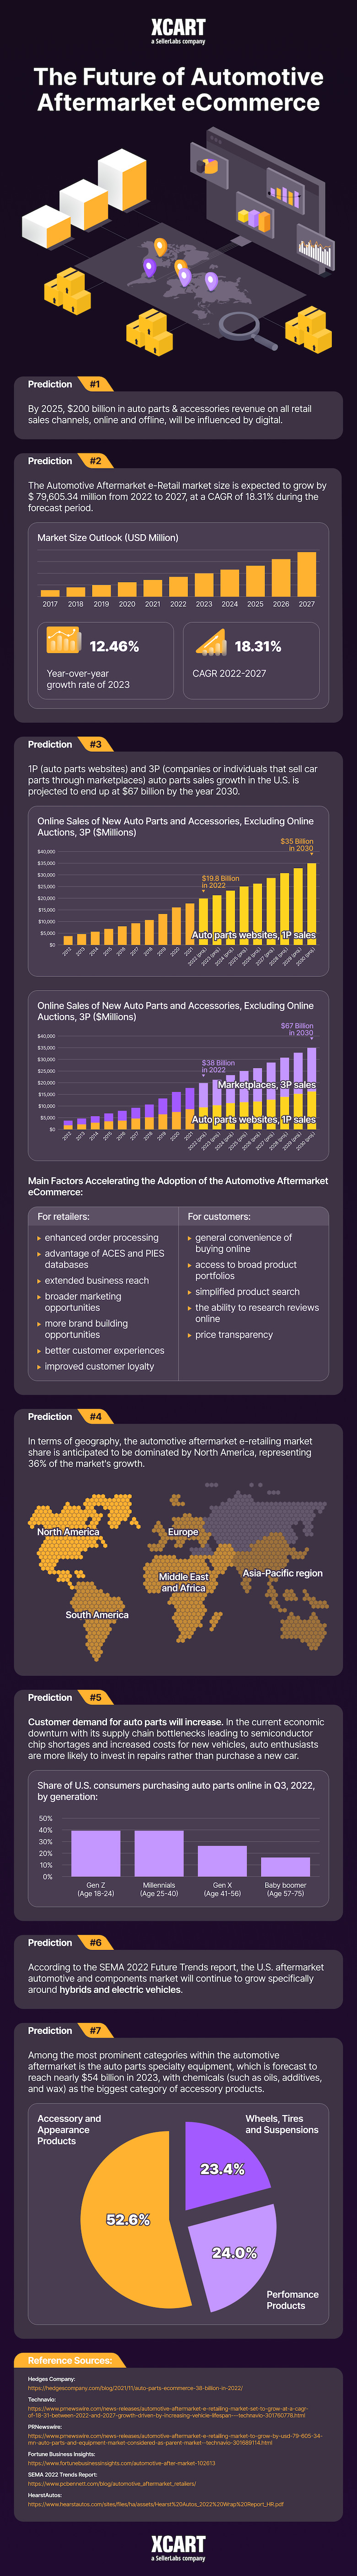 Infographic entitled the Future of Automotive Aftermarket eCommerce shows the most topical automotive trends and market predictions.